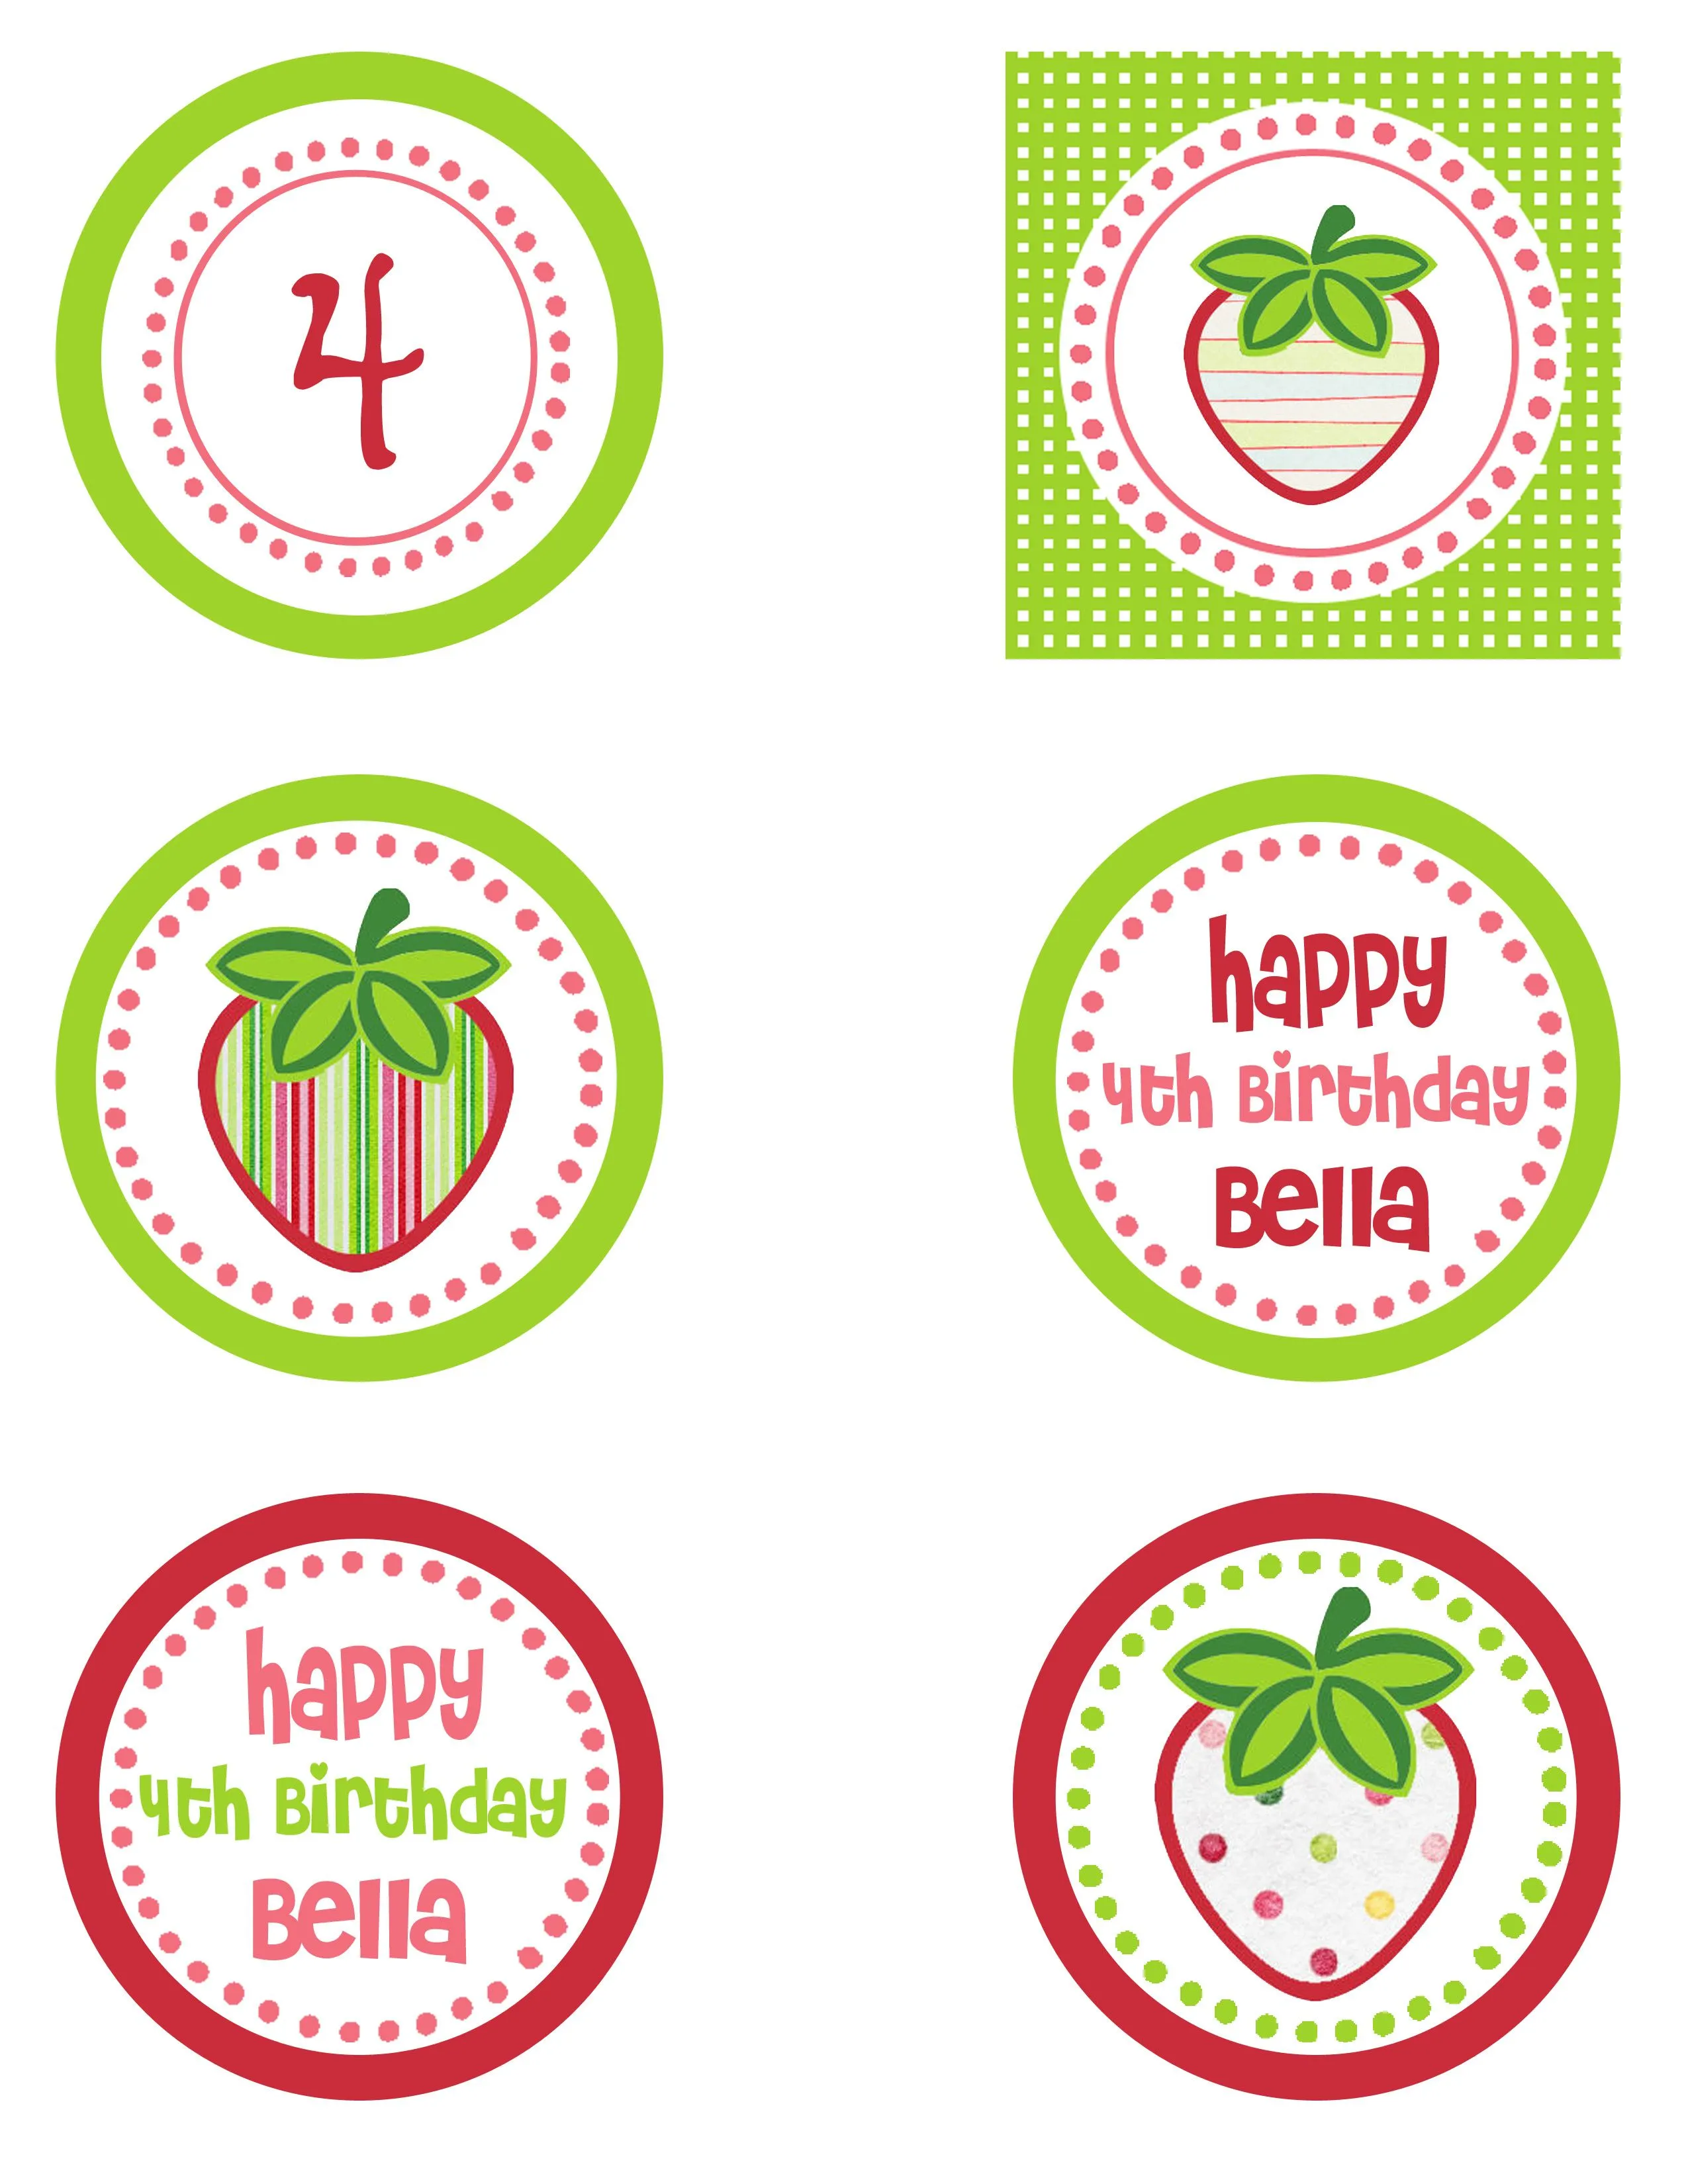 Strawberry Shortcake Font Images & Pictures - Becuo